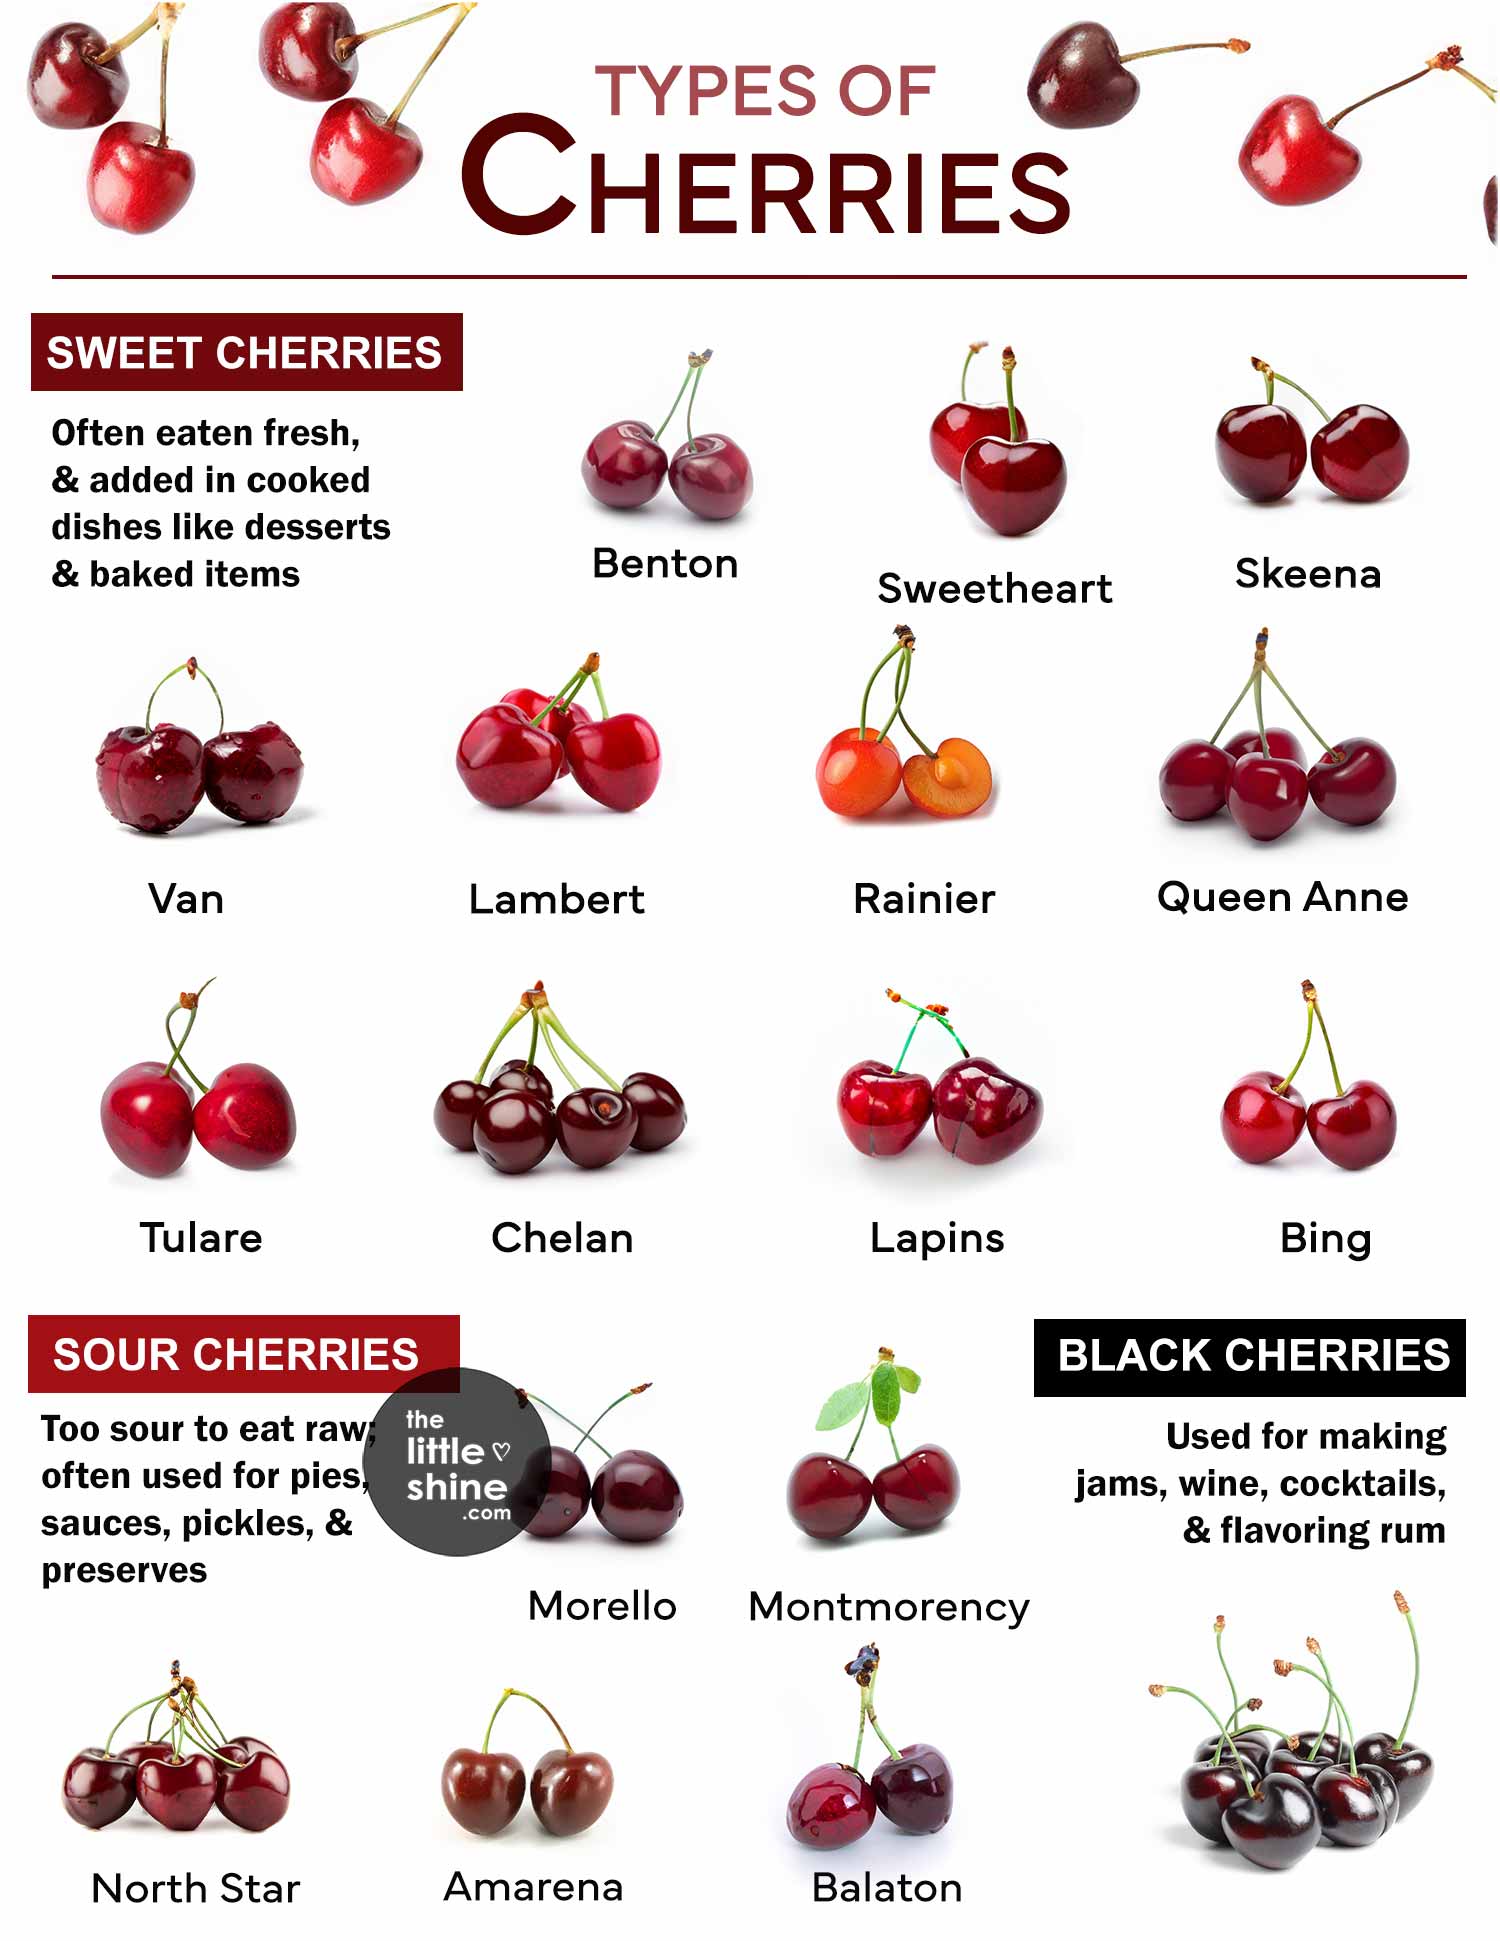 17 Types of Cherry - Uses and Benefits